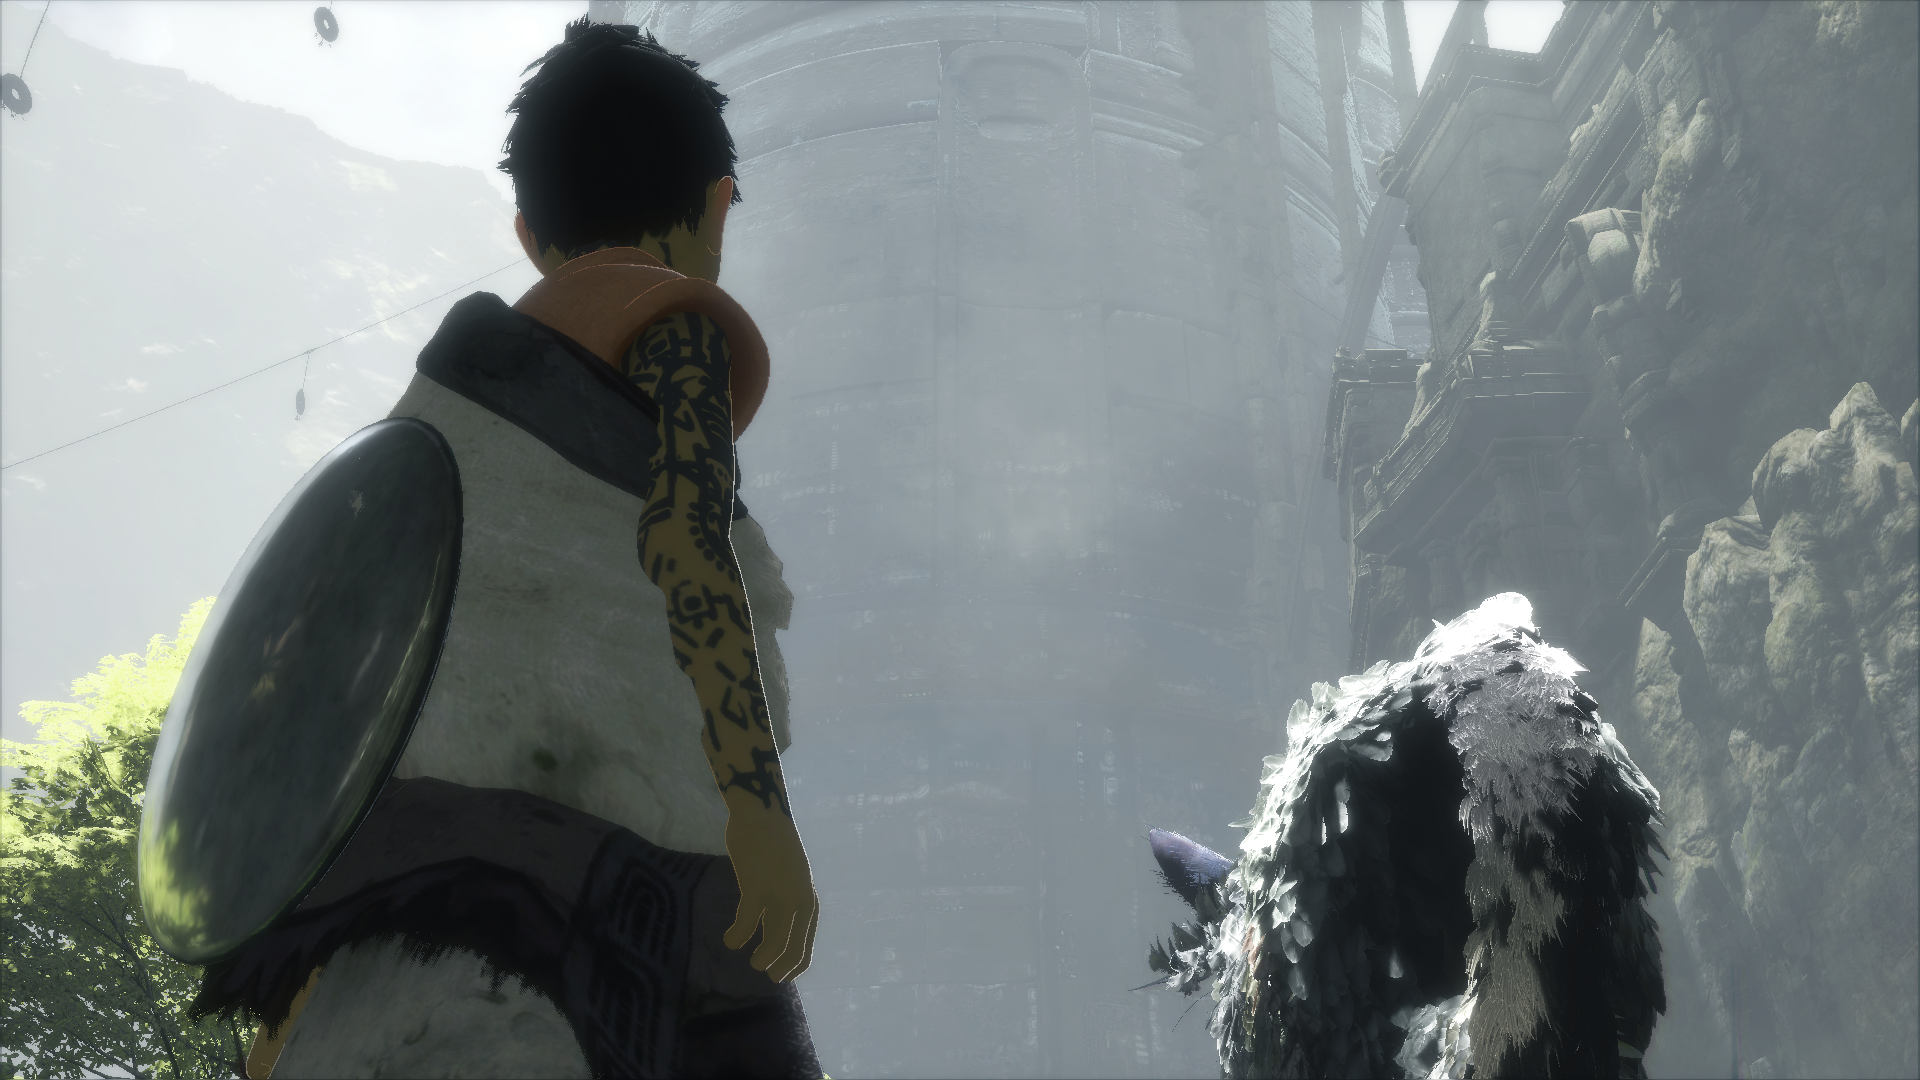 The Last Guardian Review - Gaming Respawn